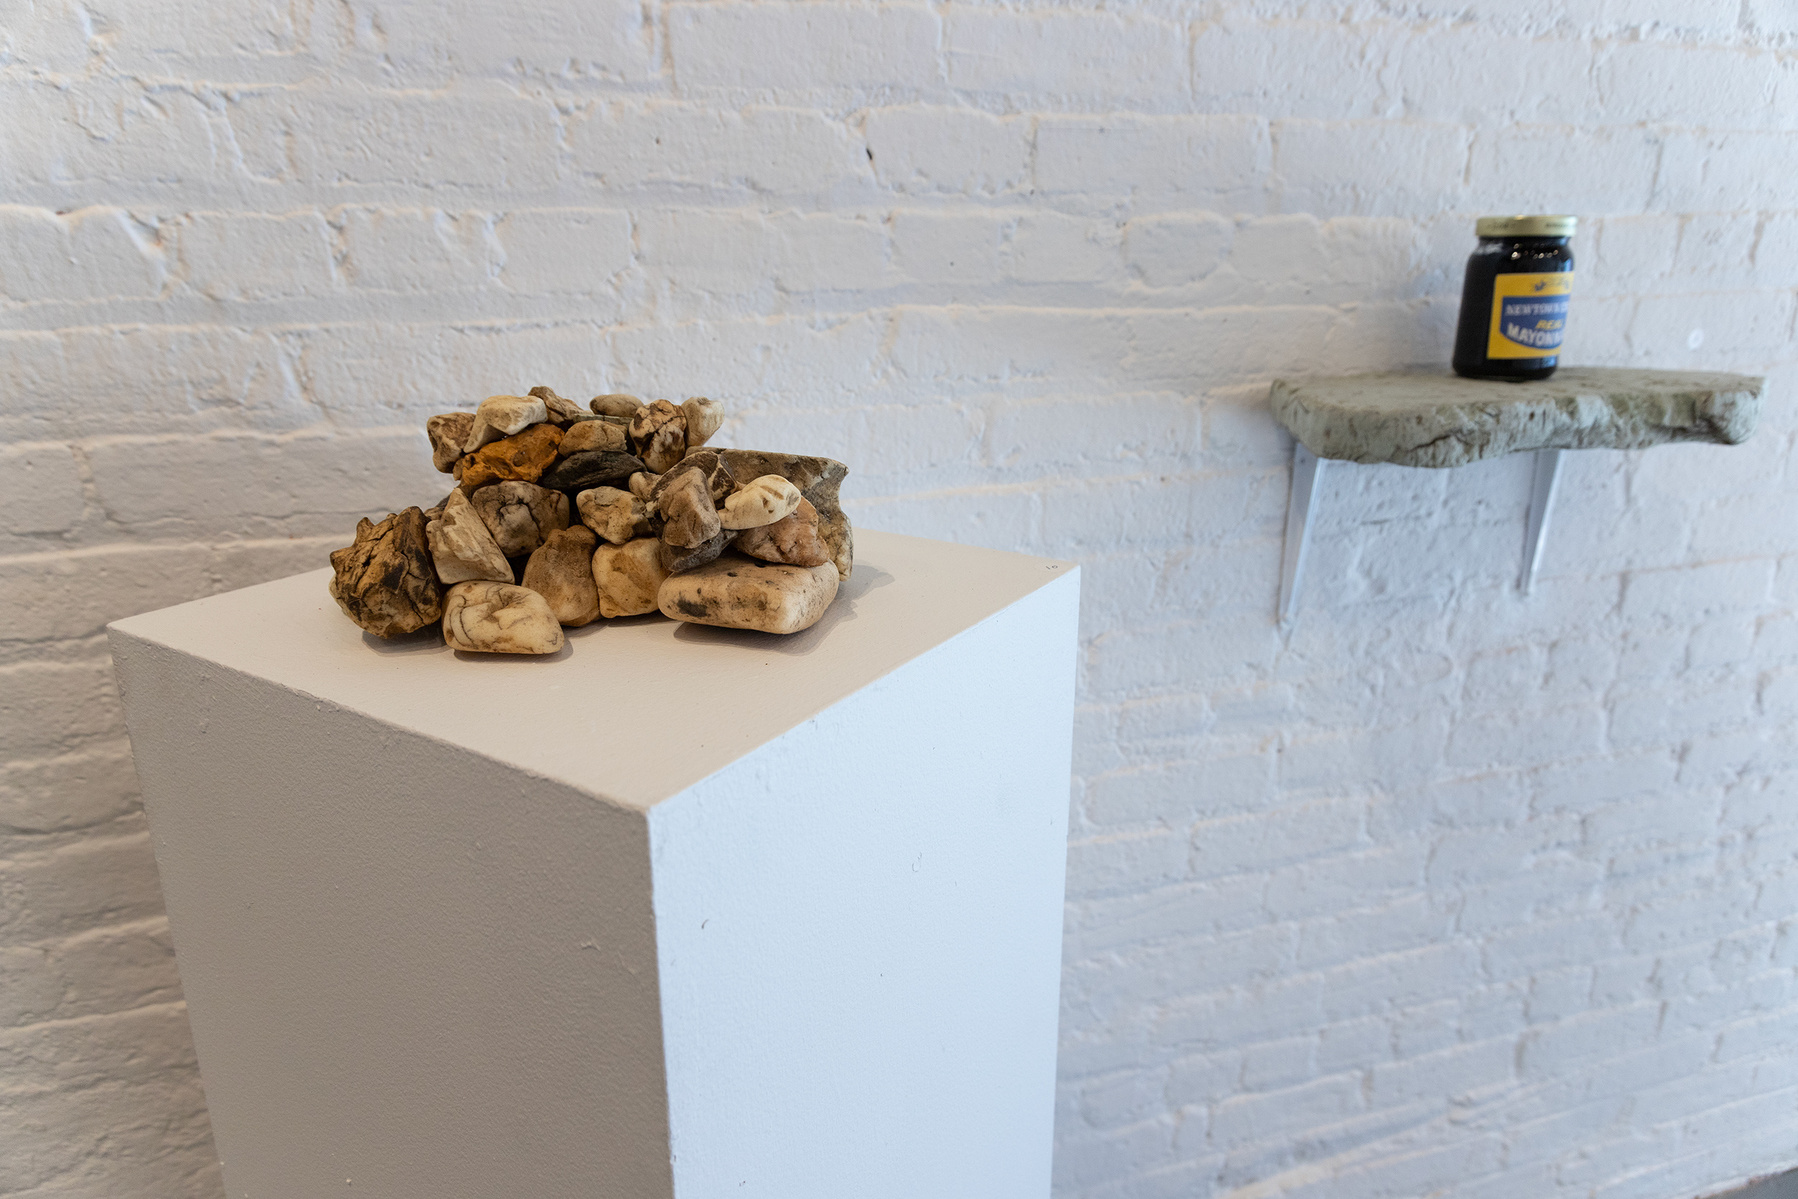 From Priscilla Stadler's SLUDGE art project about Newtown Creek, a toxic NYC waterway. Foreground: "Creek Stones", a pile of weathered pieces of styrofoam, insulation foam etc that look like stones but are not.